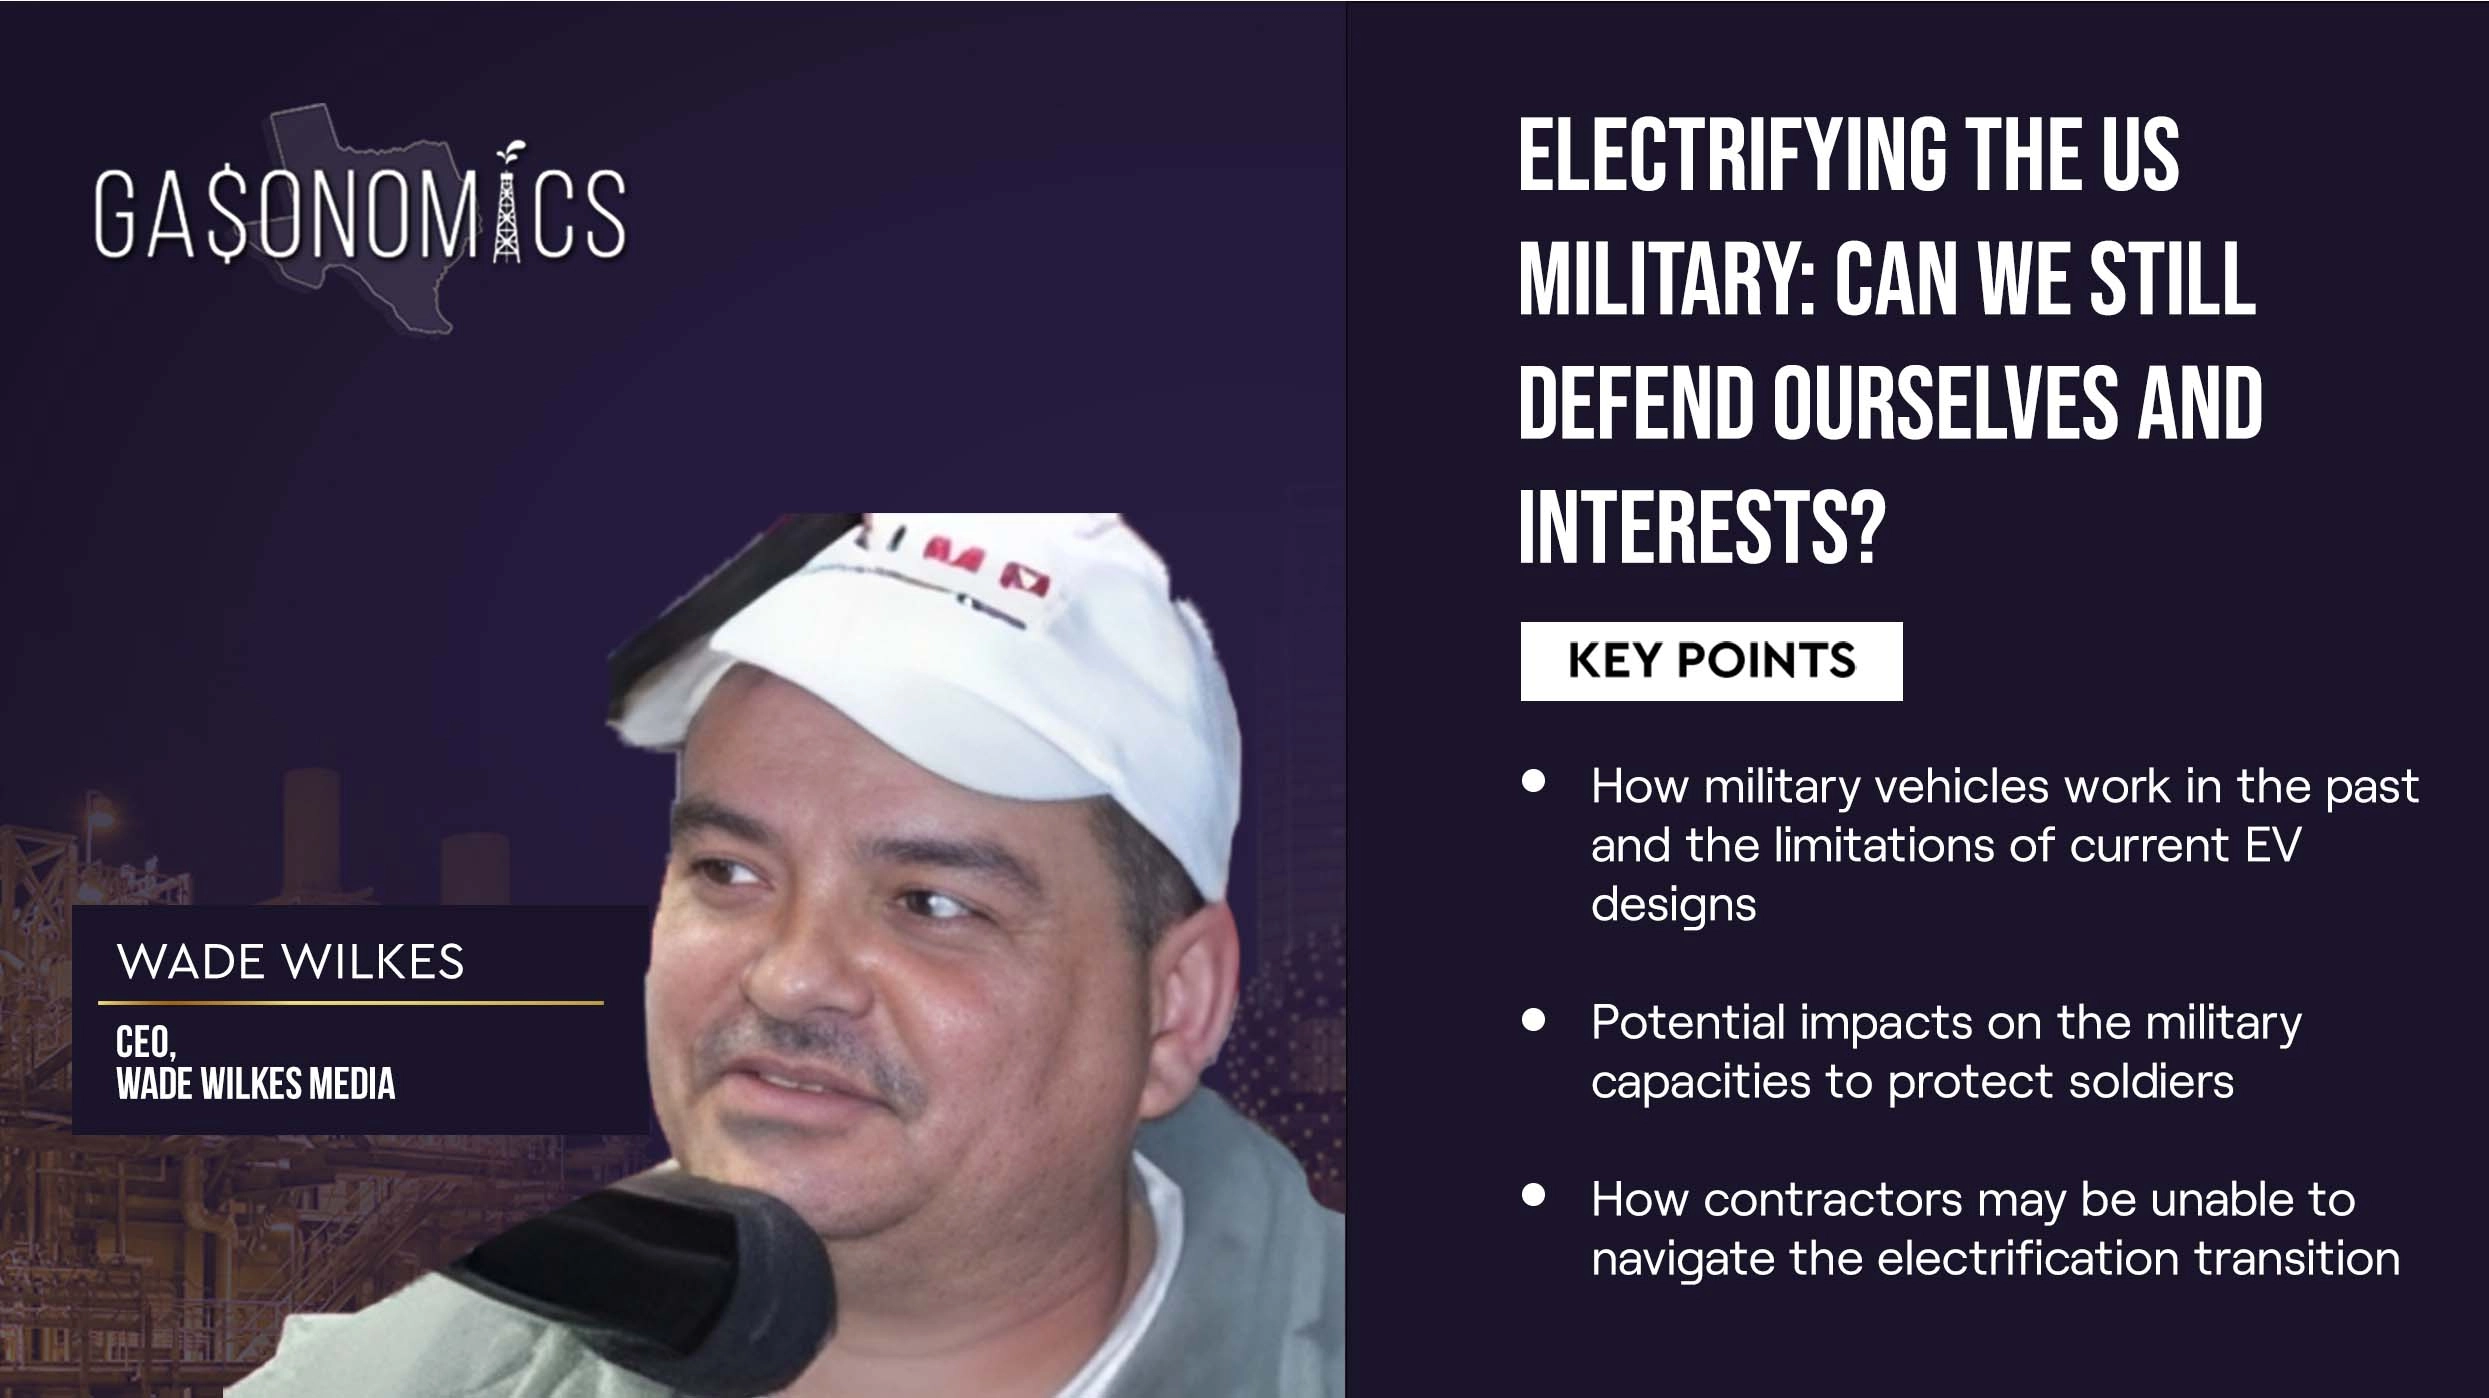 Electrifying the US Military: Can We Still Defend Ourselves and Interests?